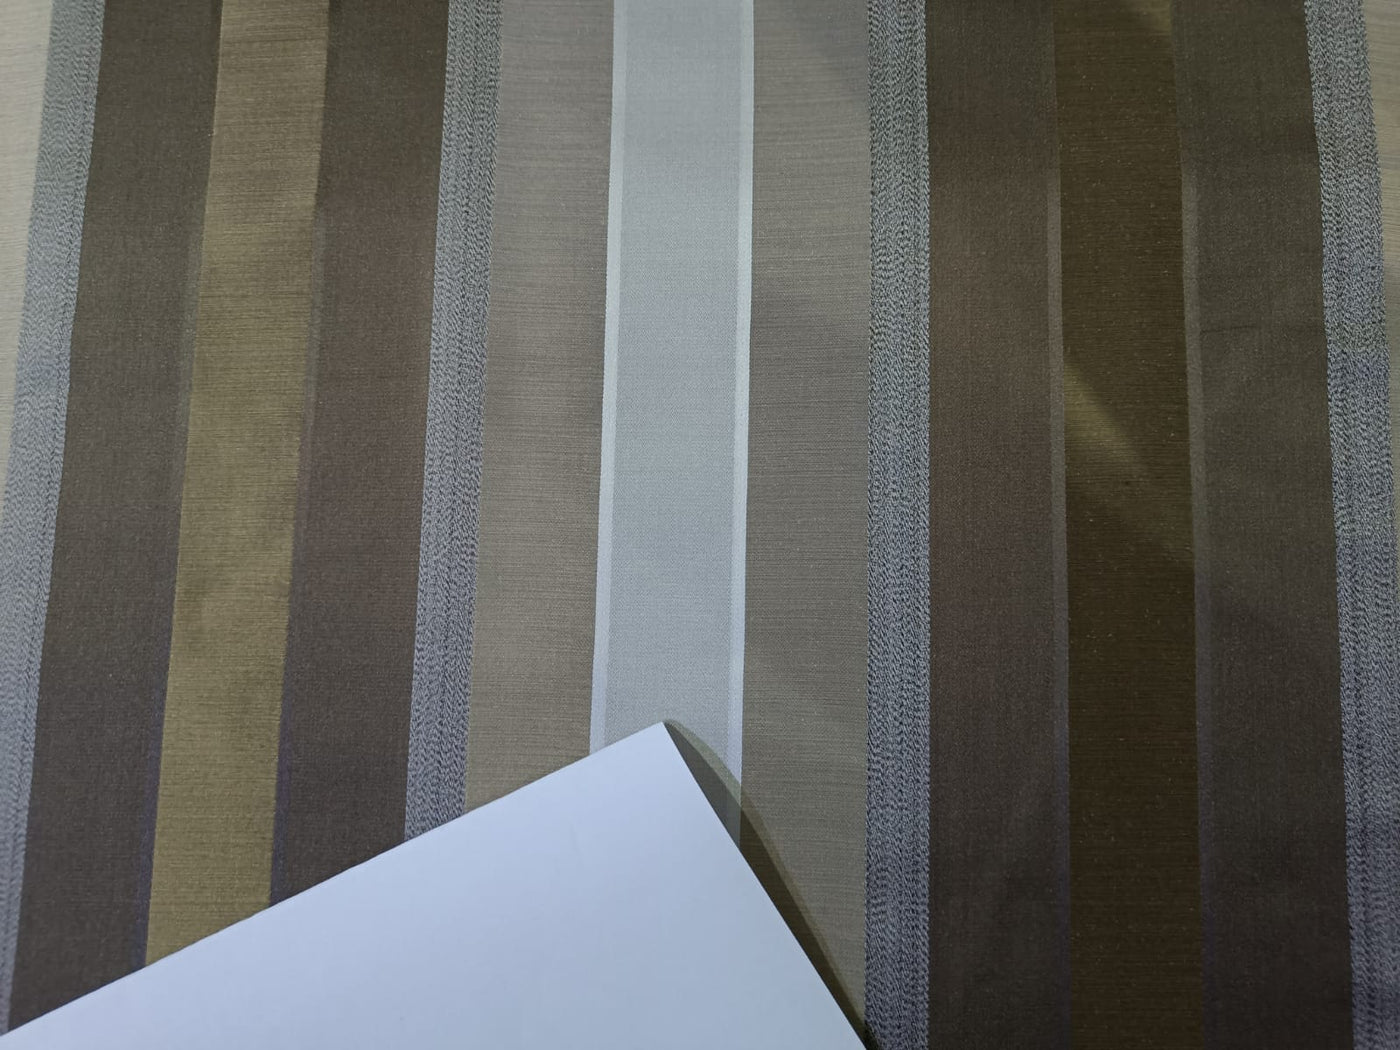 100% Silk Taffeta Fabric Shades of Brown,Gold & Grey colour with Satin Stripes 54" wide TAF#S102[1]